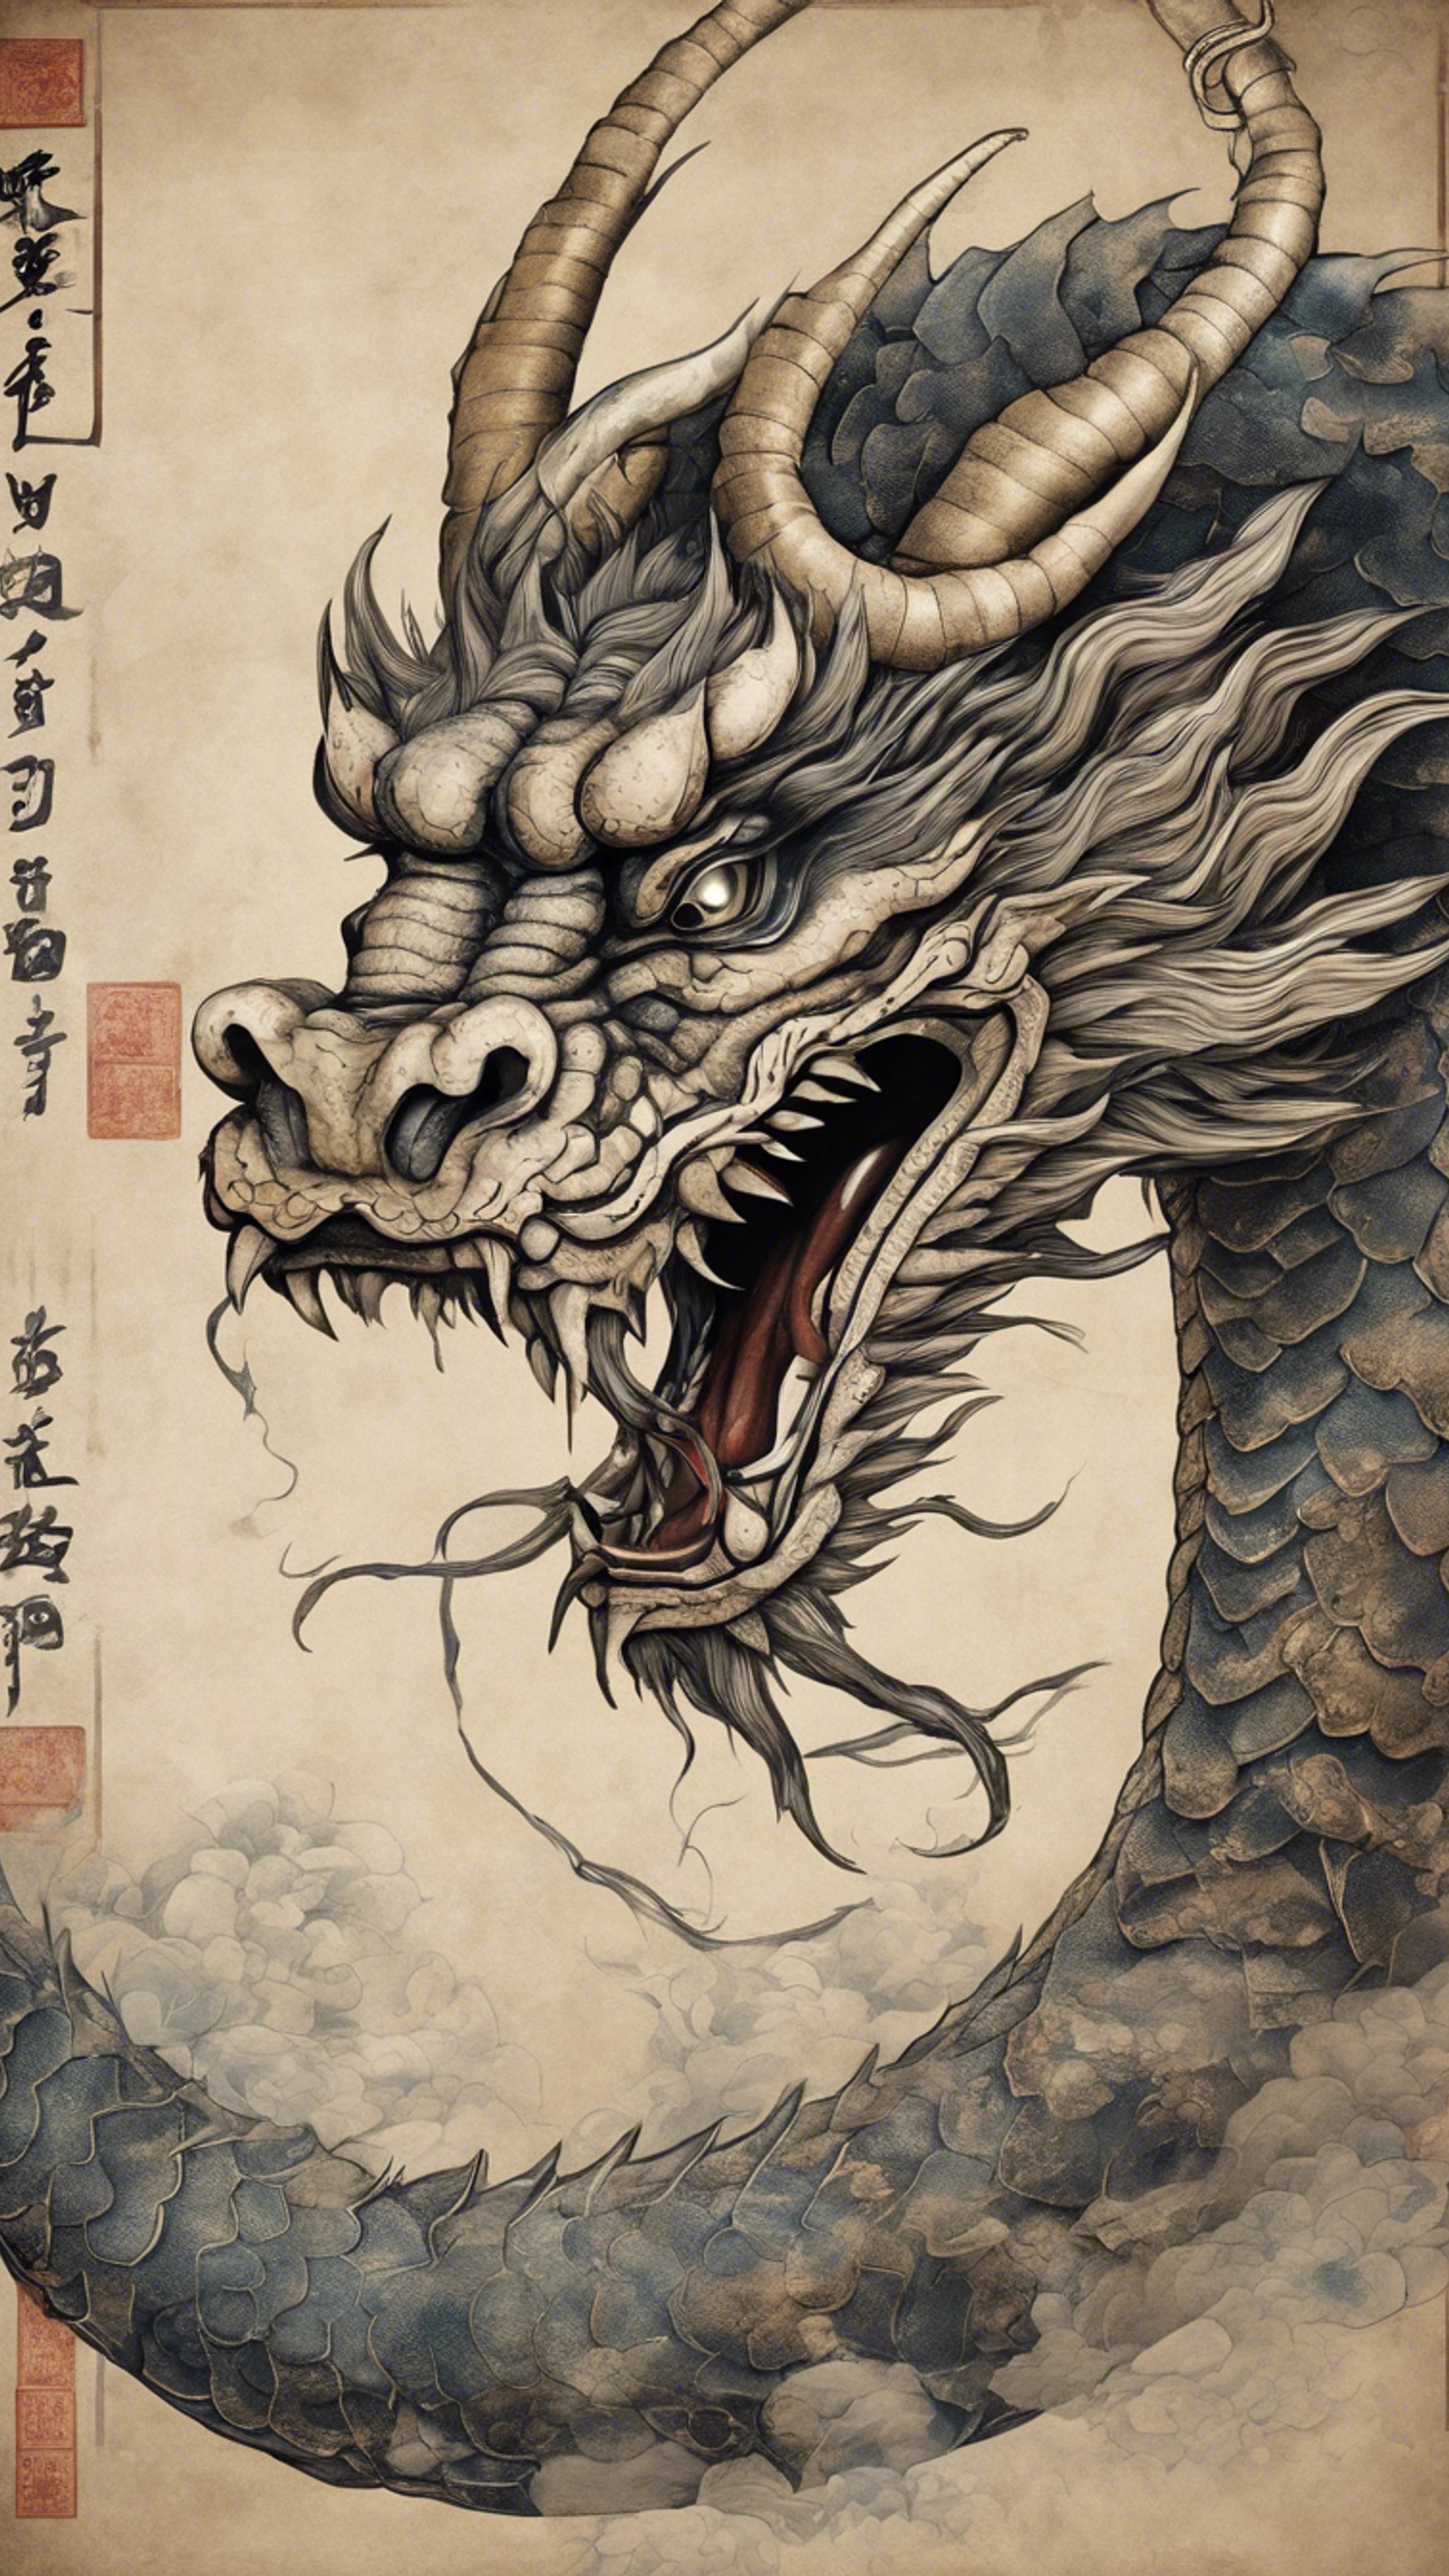 A majestic Japanese dragon illustrated in an ancient scroll. Papel de parede[ee61e4c394914154b9e3]